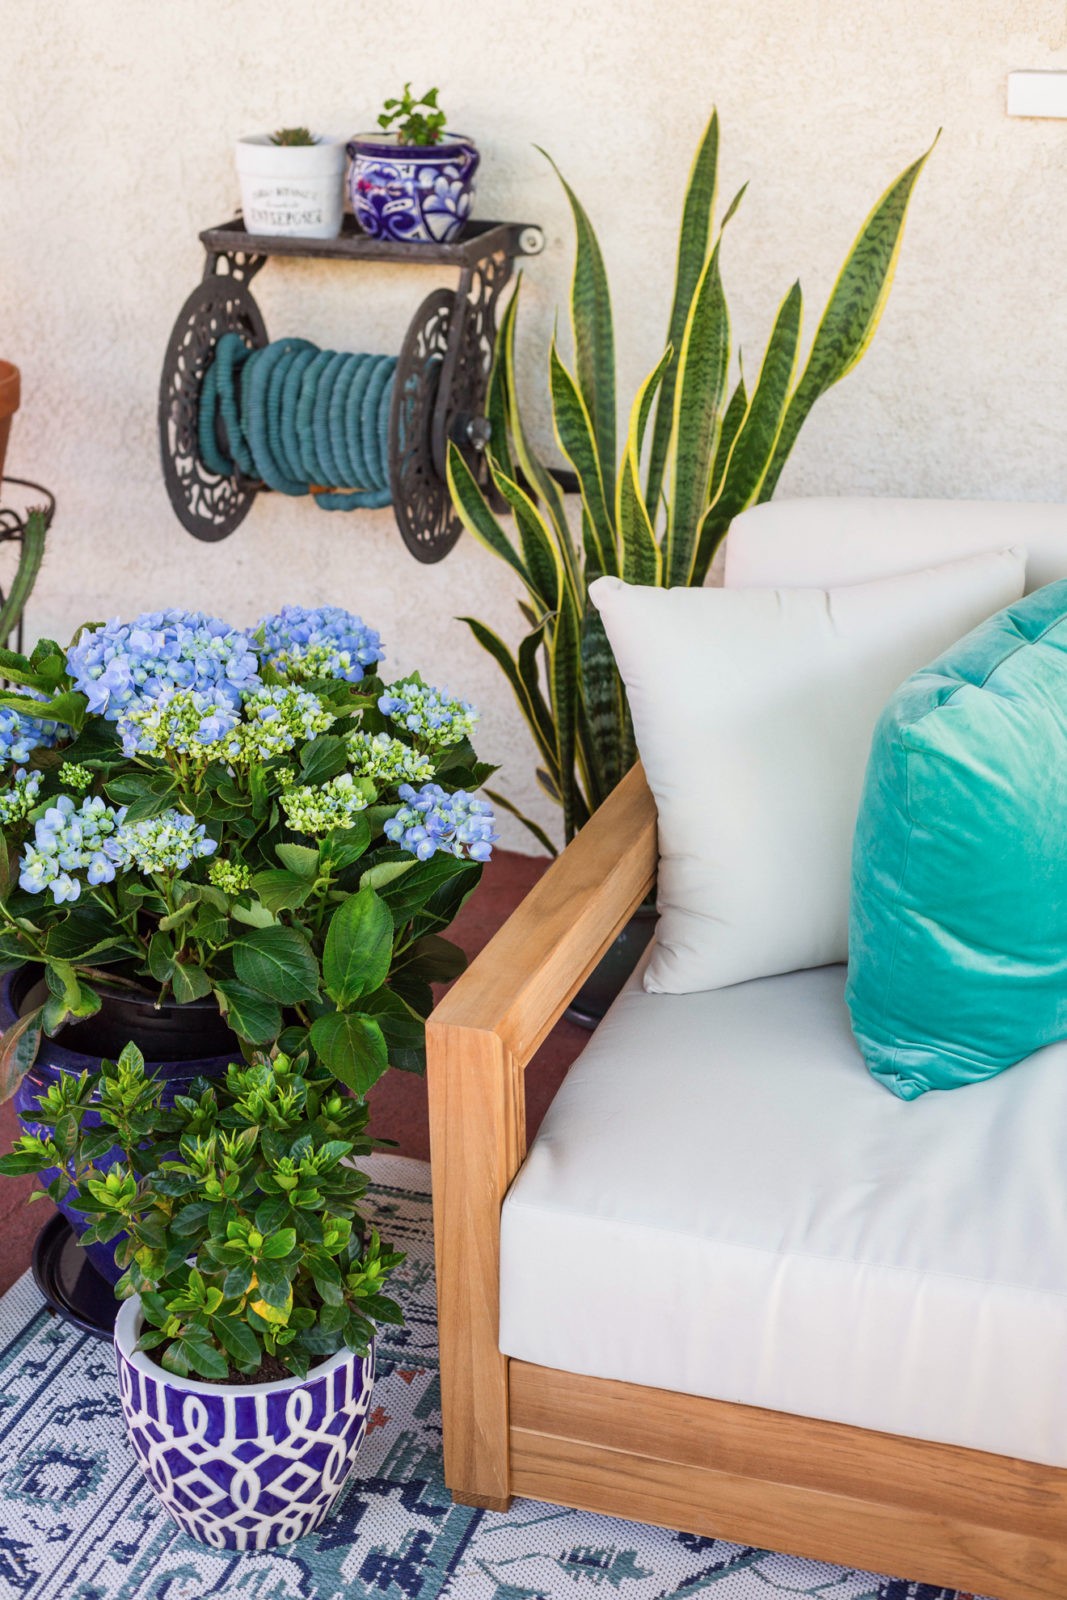 Patio Decor Ideas with Bed Bath & Beyond by Home Decor Blogger Laura Lily, Patio Planter Ideas,